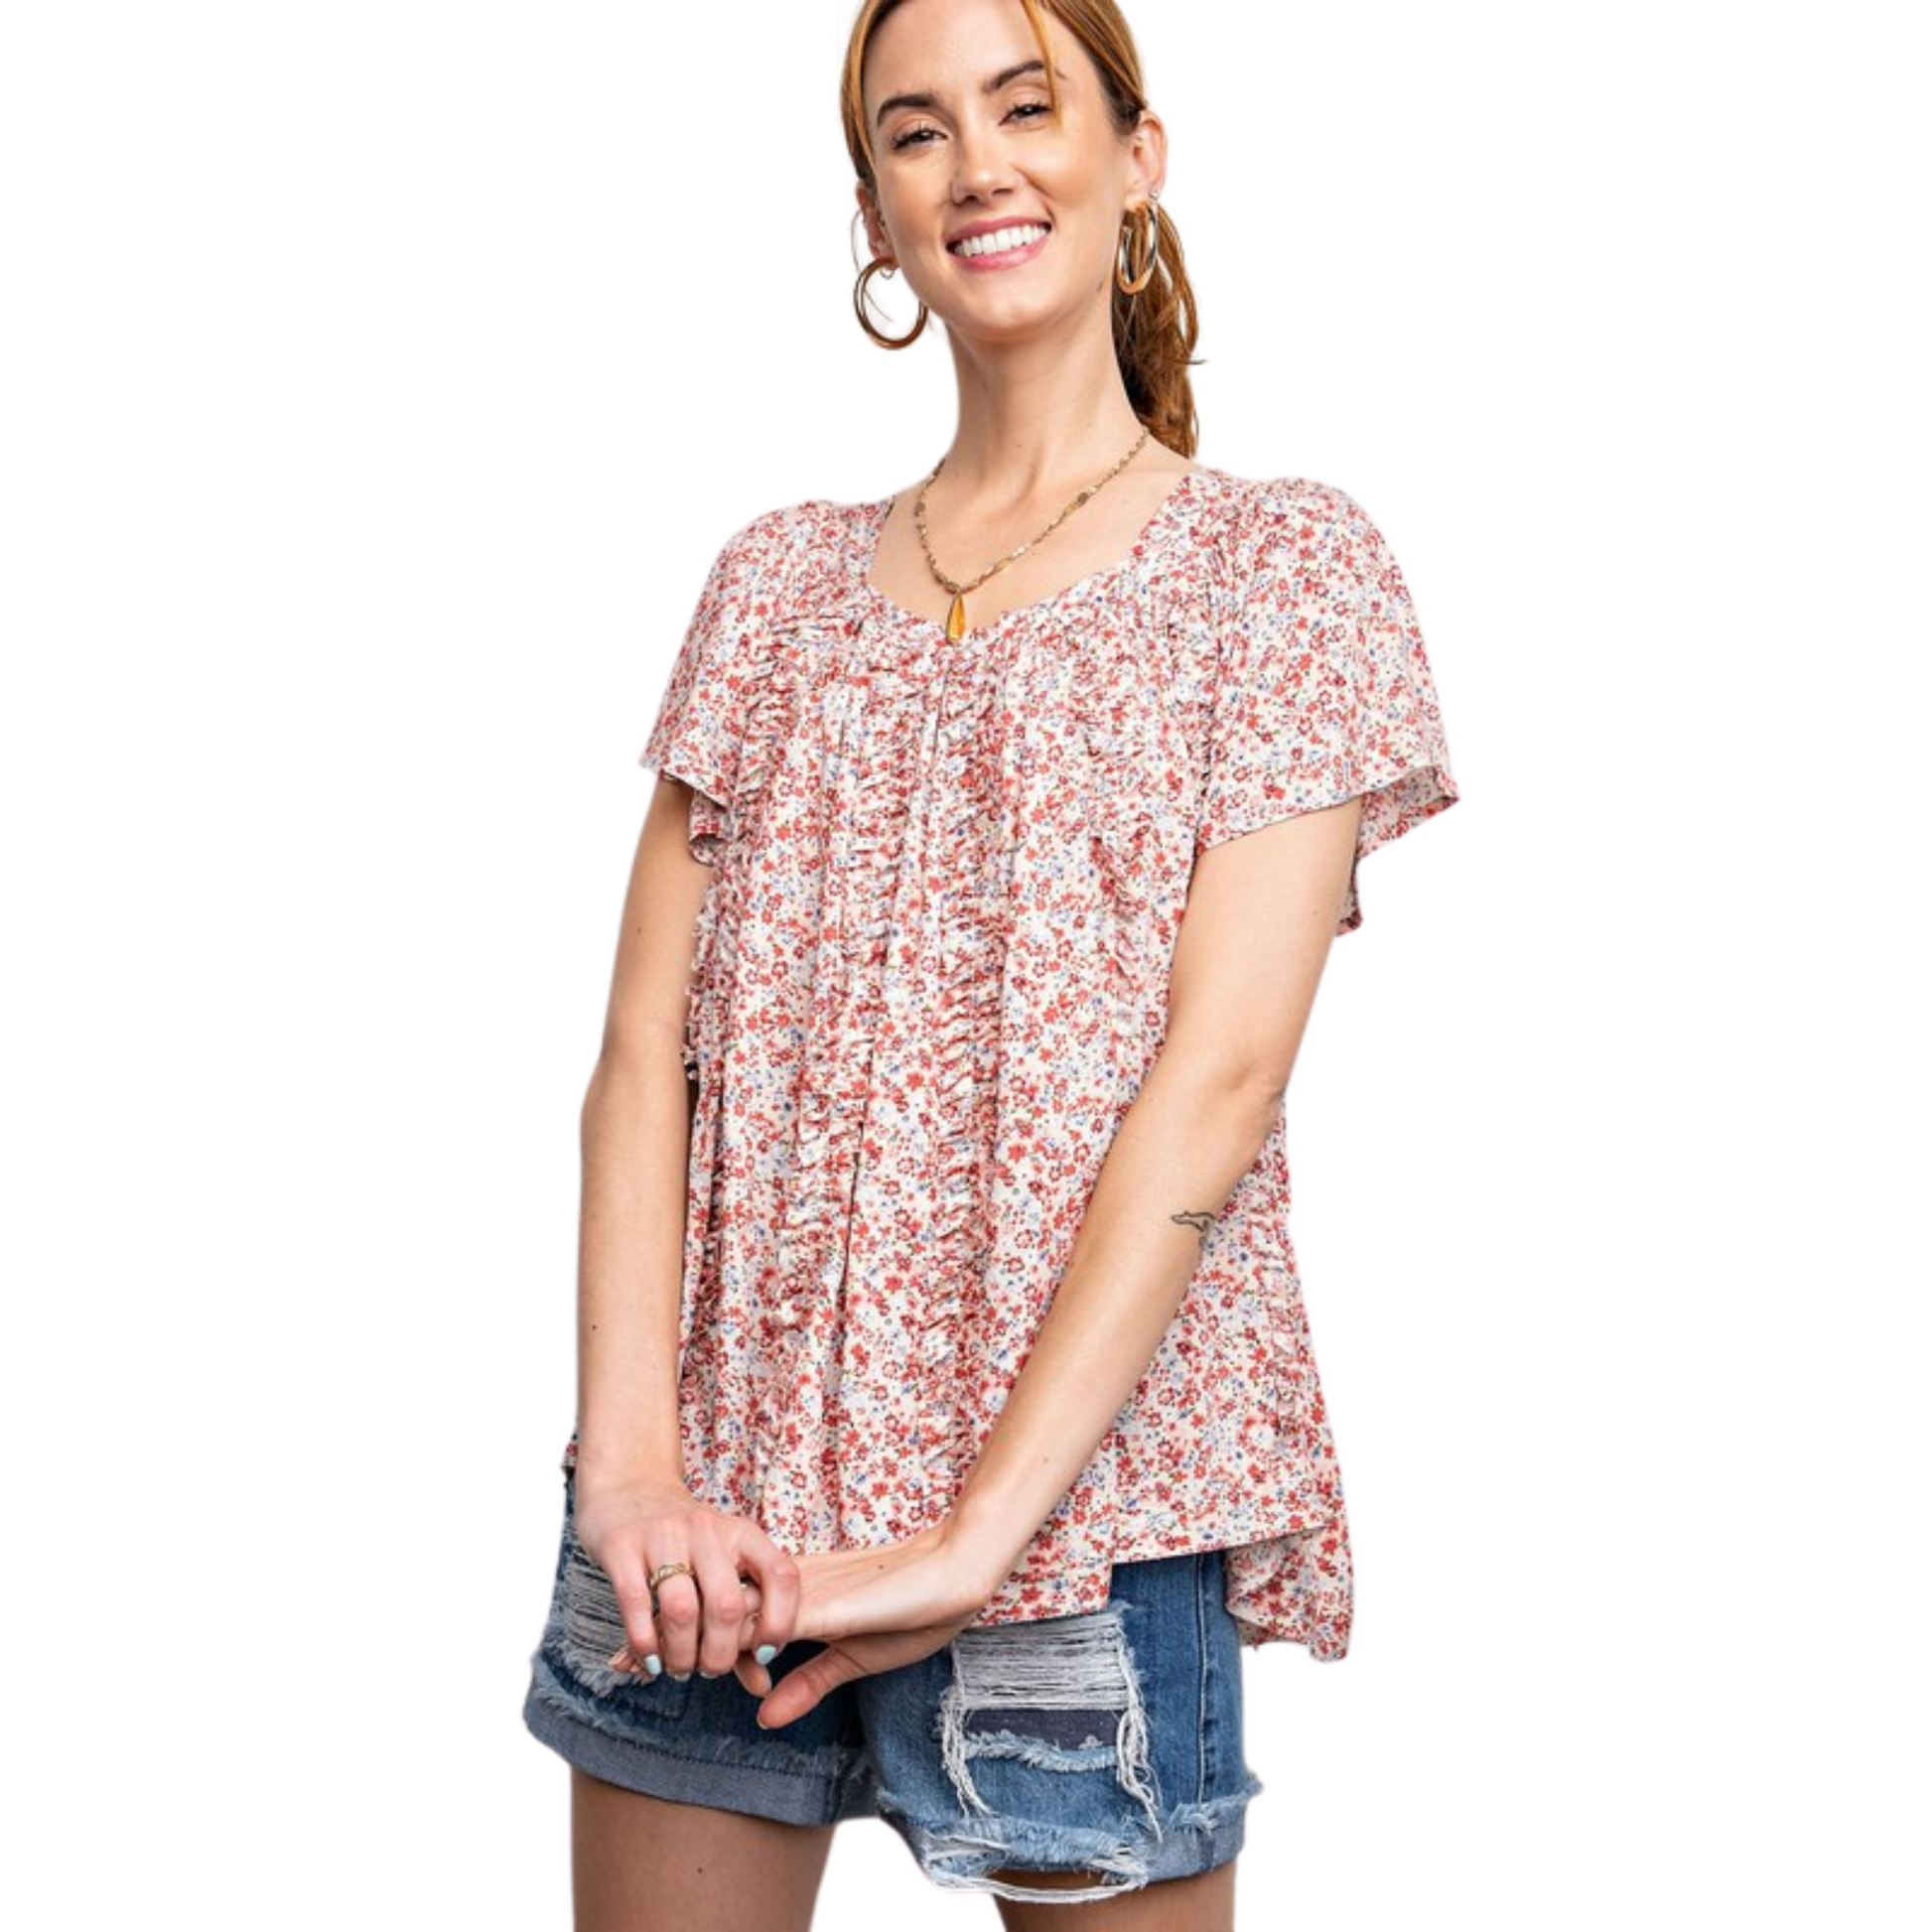 This Floral Printed Rayon Top is an effortless style edition to your wardrobe. It features a beautiful floral print on a lightweight rayon fabric, short sleeves, and a tie back to adjust the fit. The perfect top to keep you comfortable and stylish.